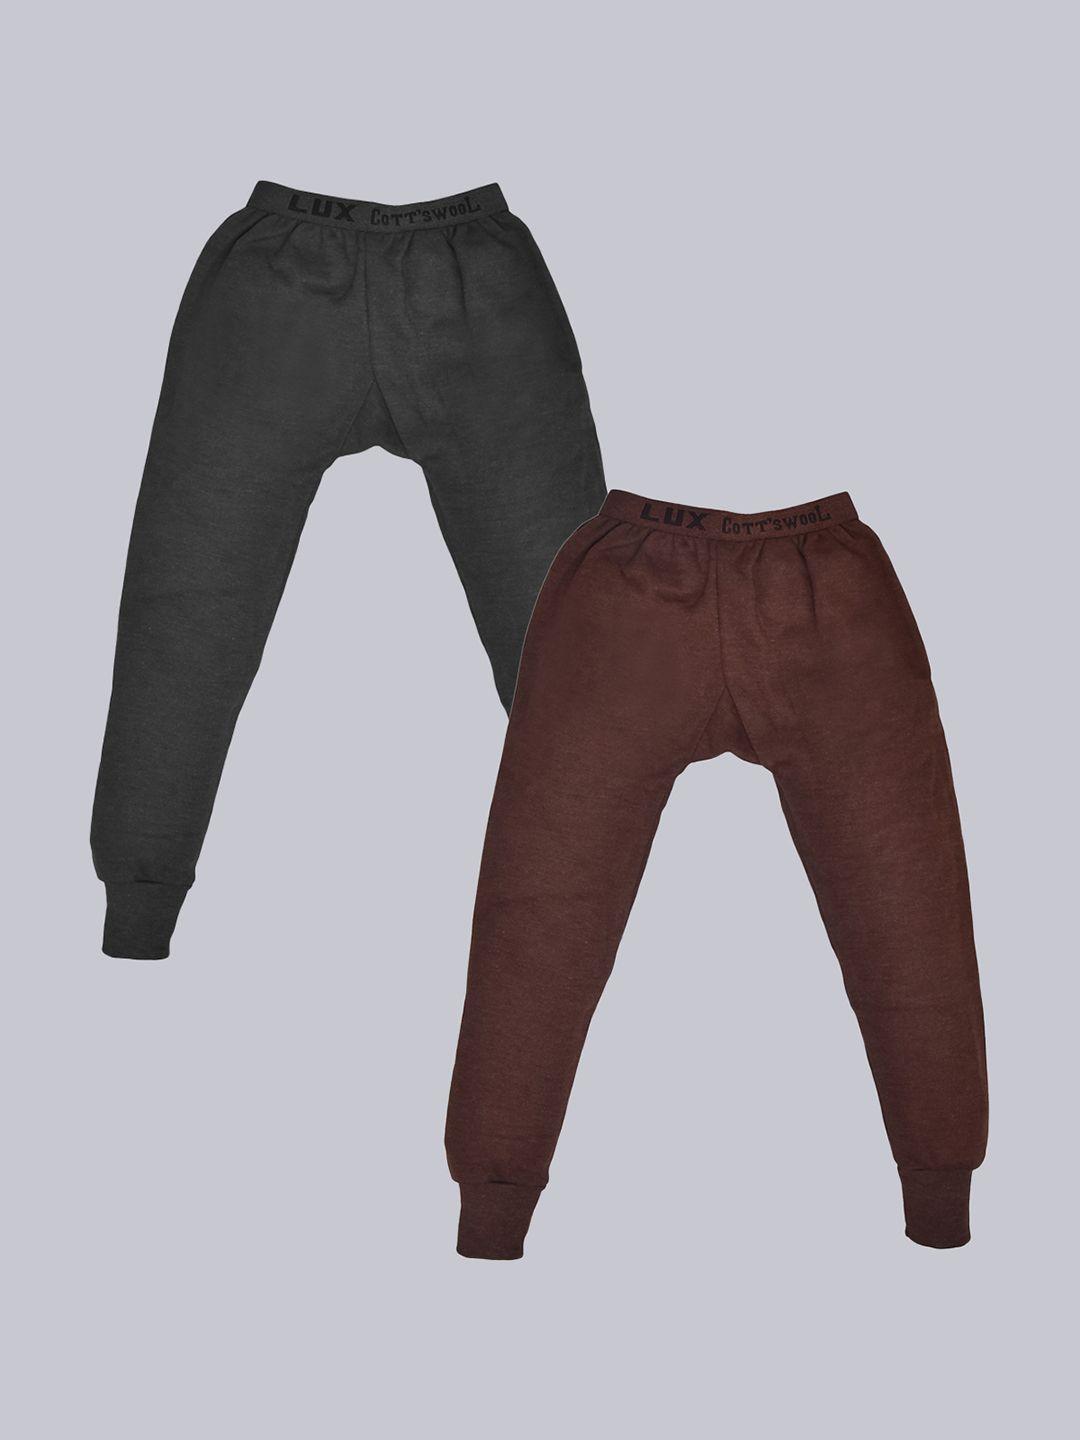 lux cottswool boys pack of 2 brown and black solid cotton thermal bottoms